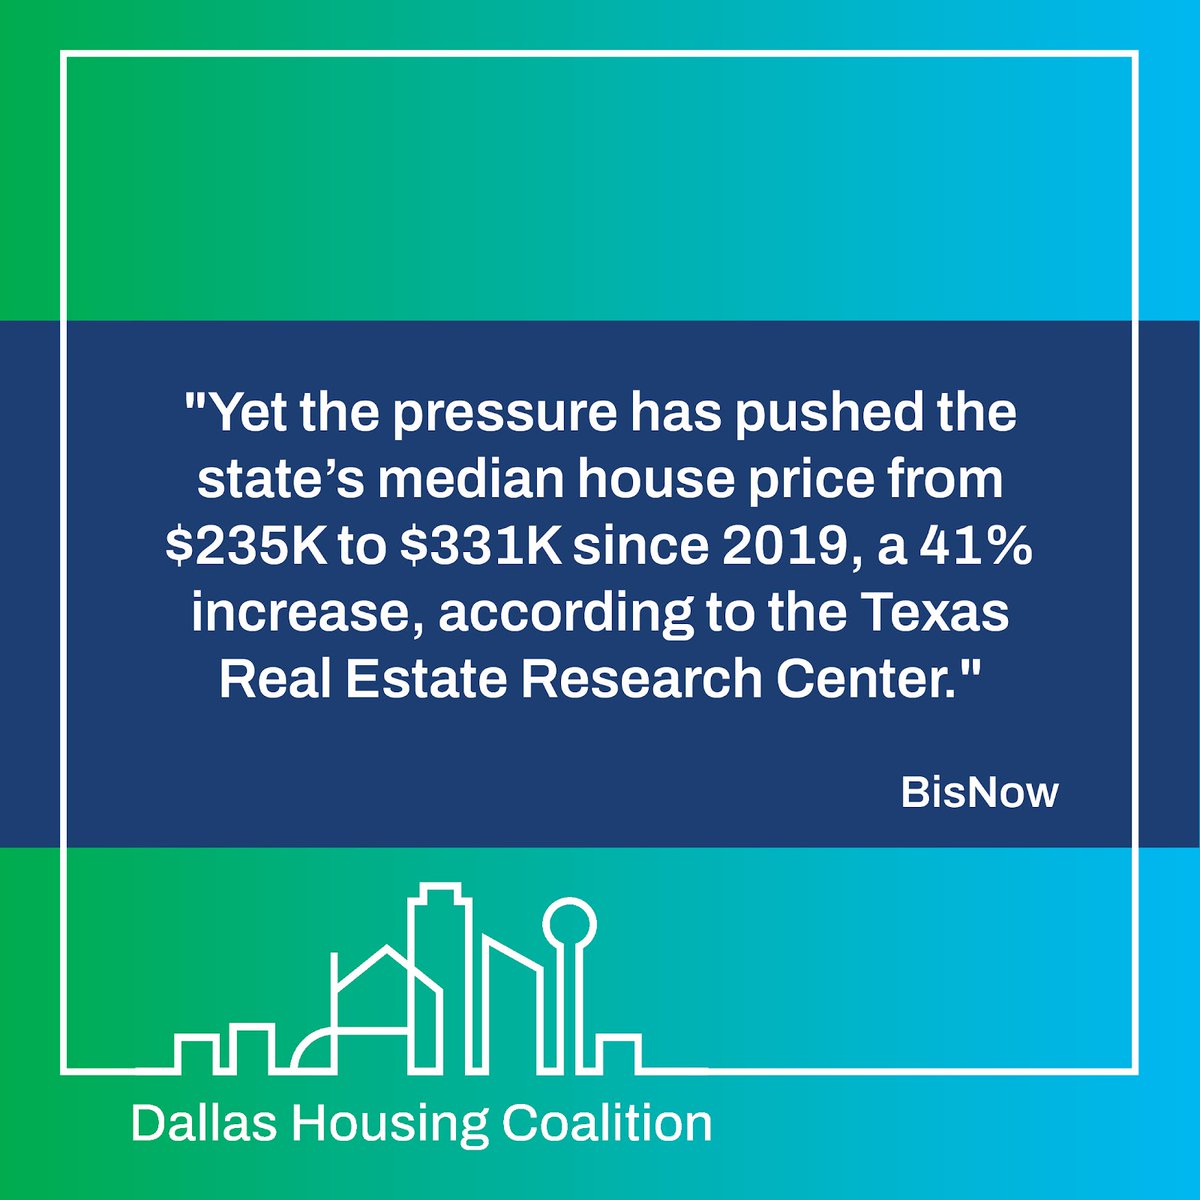 Part 1 of Bisnow's investigative series describes how Texas is grappling with a housing crisis. Experts warn that if Texas doesn't quickly step up housing production it could lose its coveted status as a people magnet. #AttainableHousing#TexasHousing bit.ly/3HaDTBT